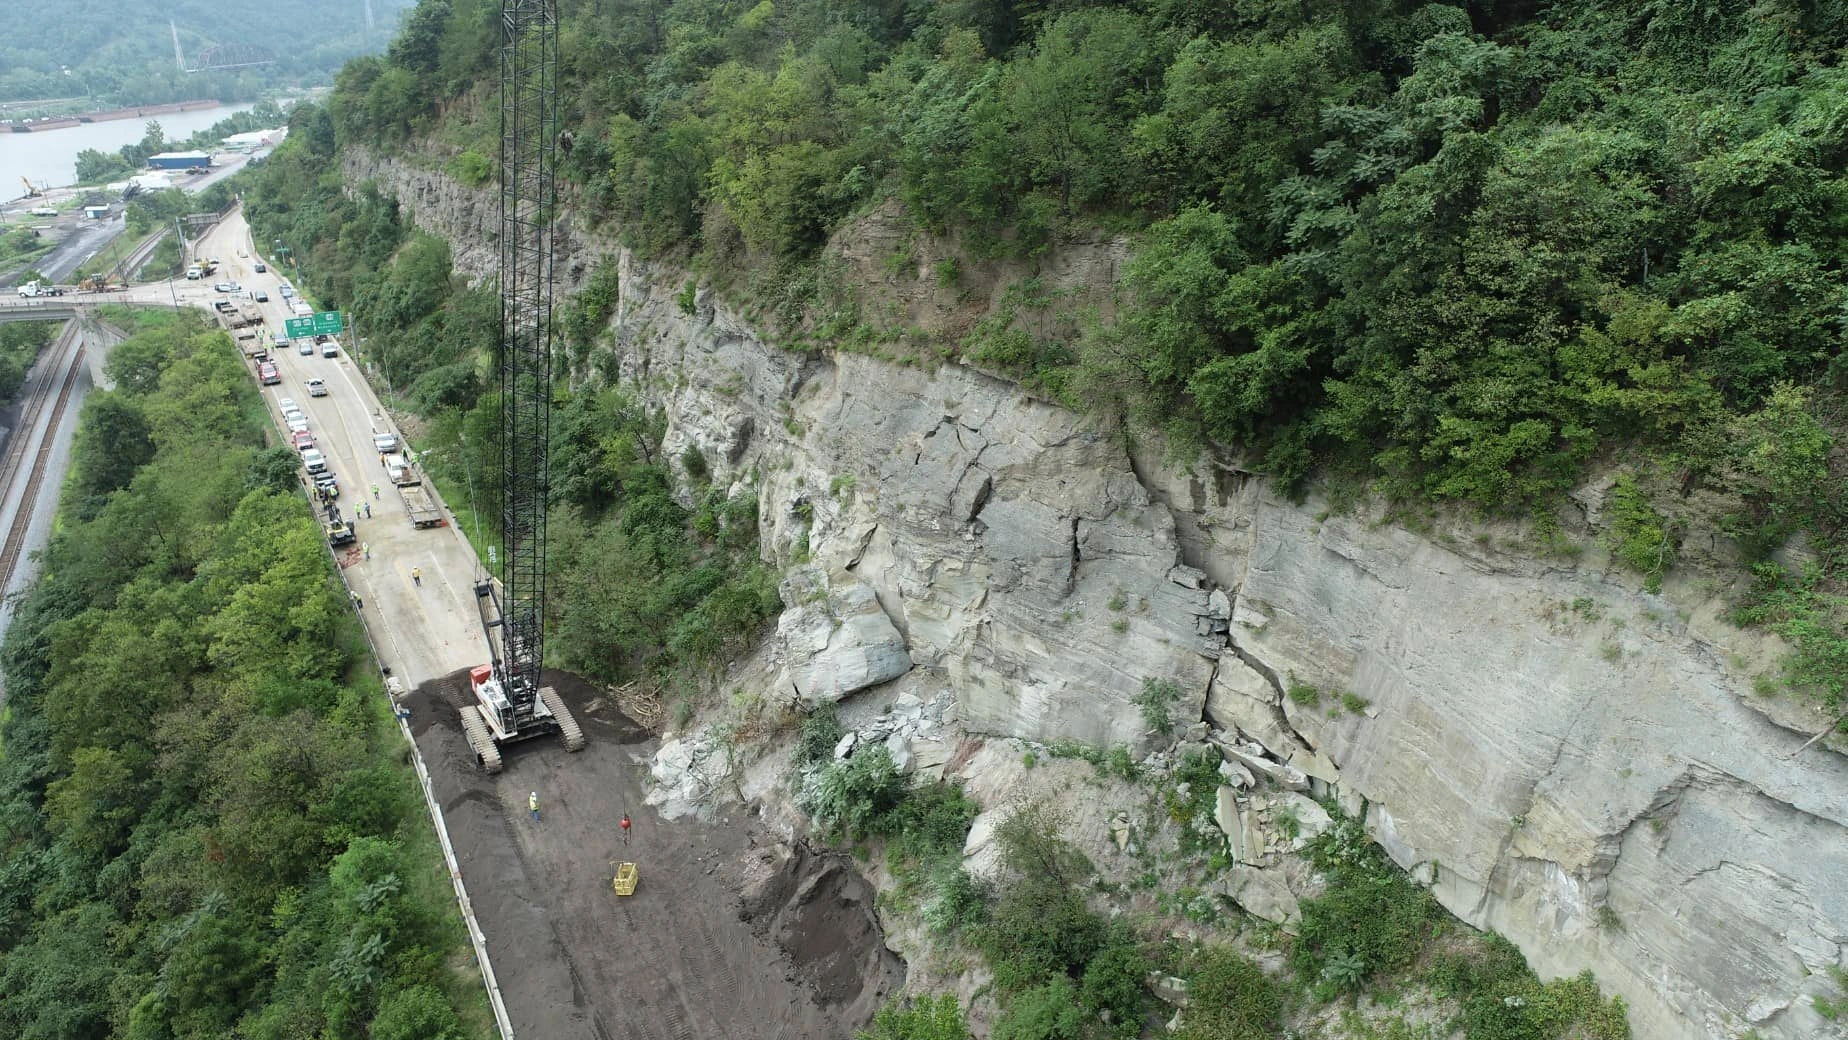 An aerial image taken from a drone shows a crane and crew working on a roadway next to train tracks and a river.